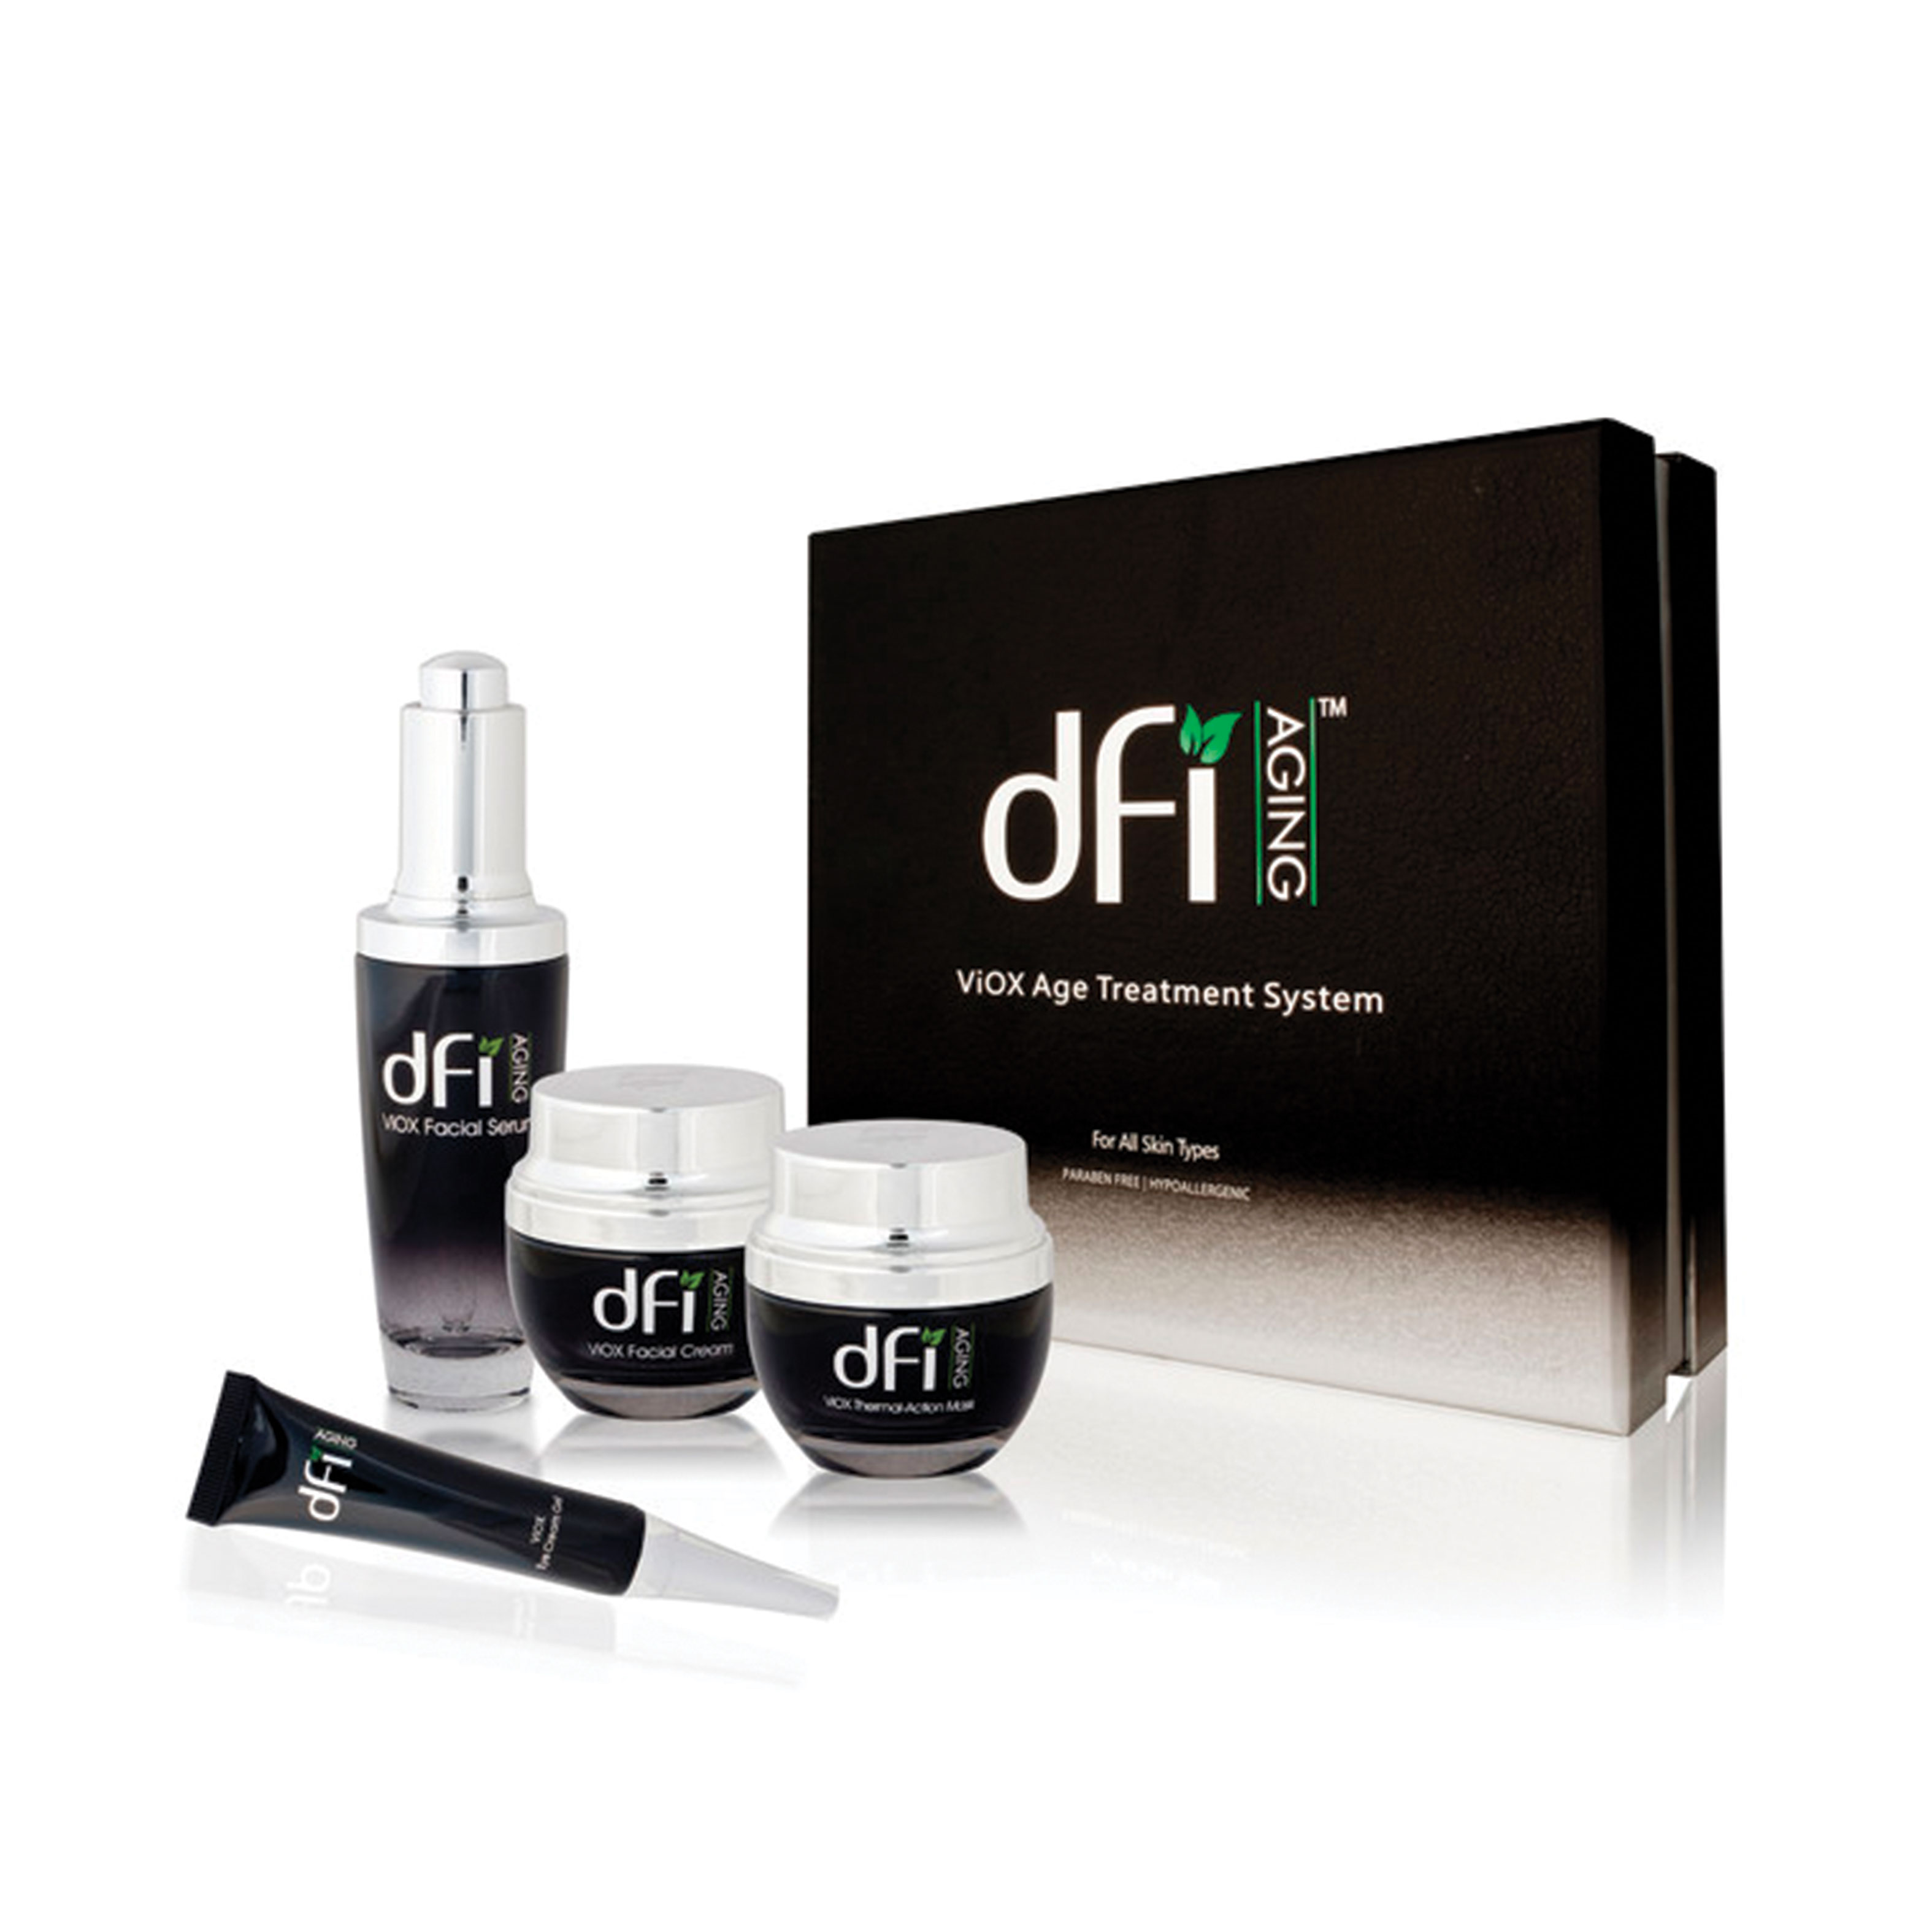 Product Branding and Packaging Design for dfi Aging Skincare's ViOX Age Treatment System